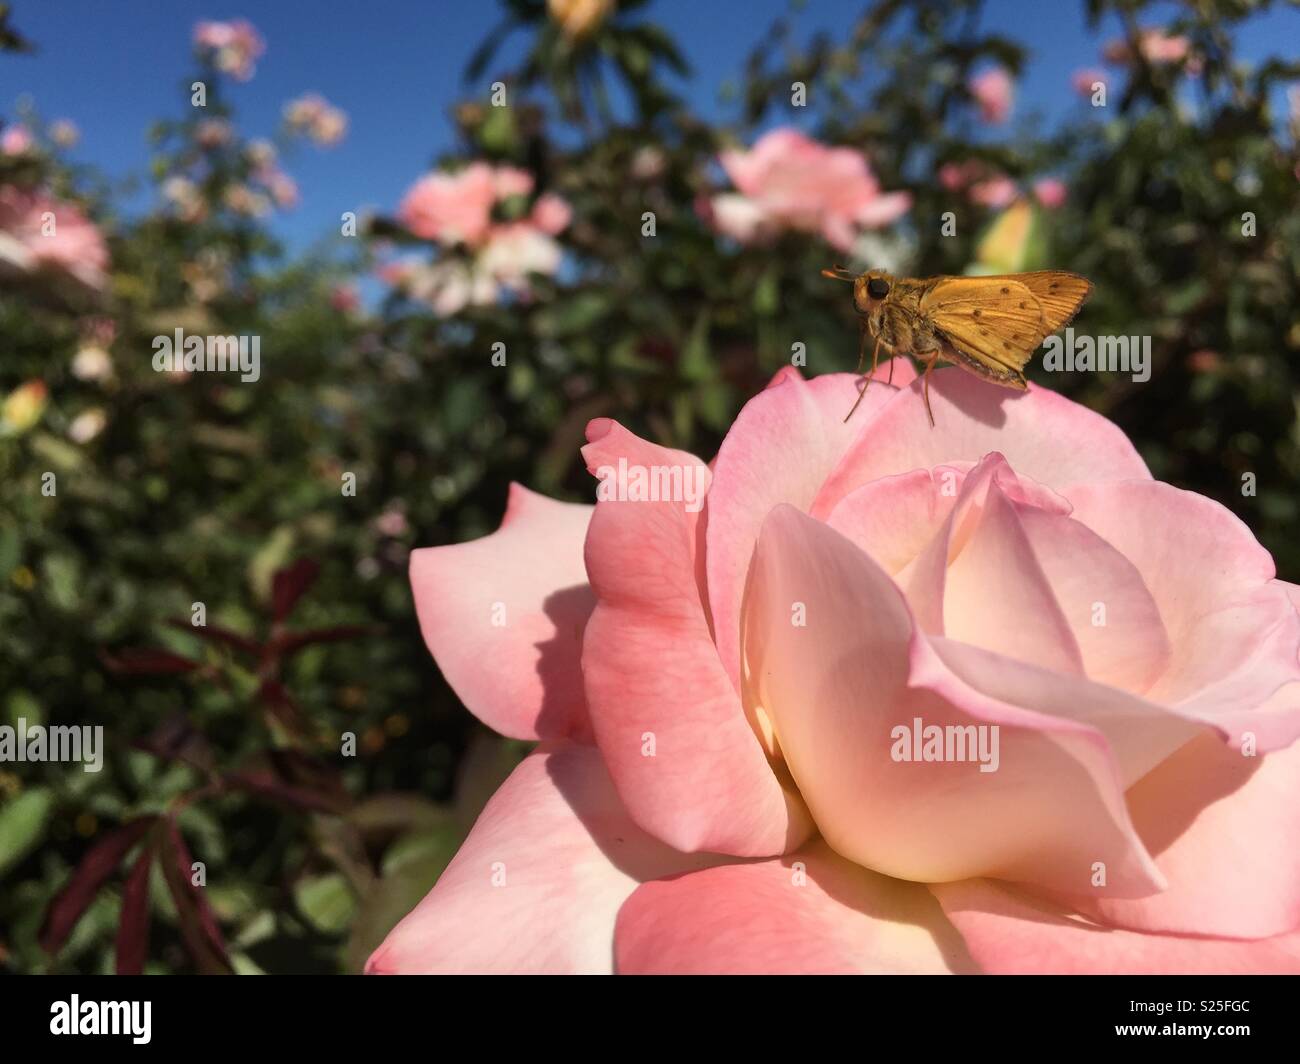 Butterfly on a rose Stock Photo